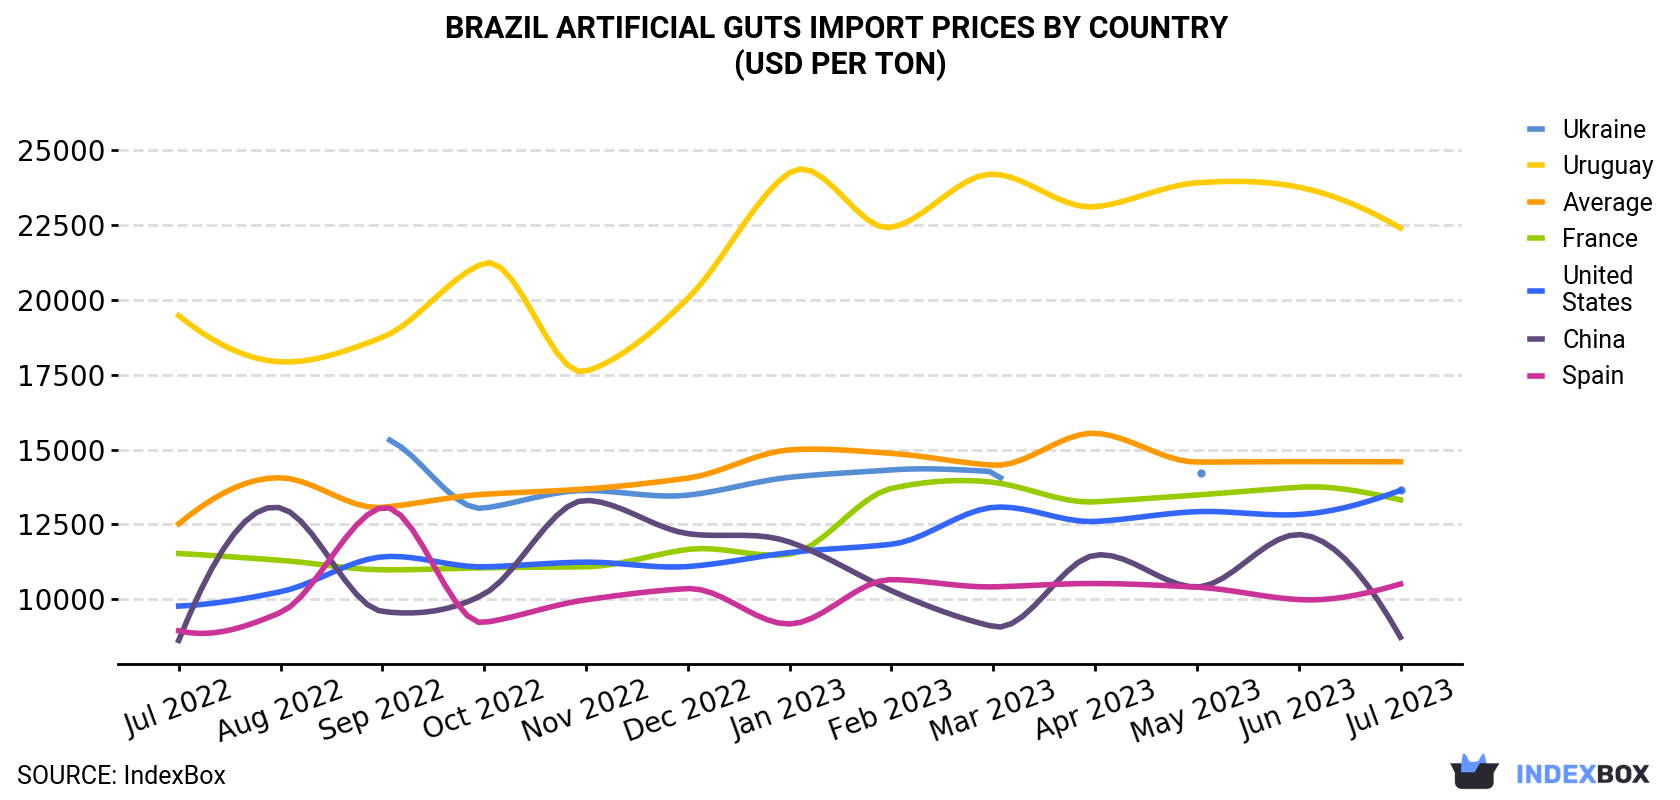 Brazil Artificial Guts Import Prices By Country (USD Per Ton)